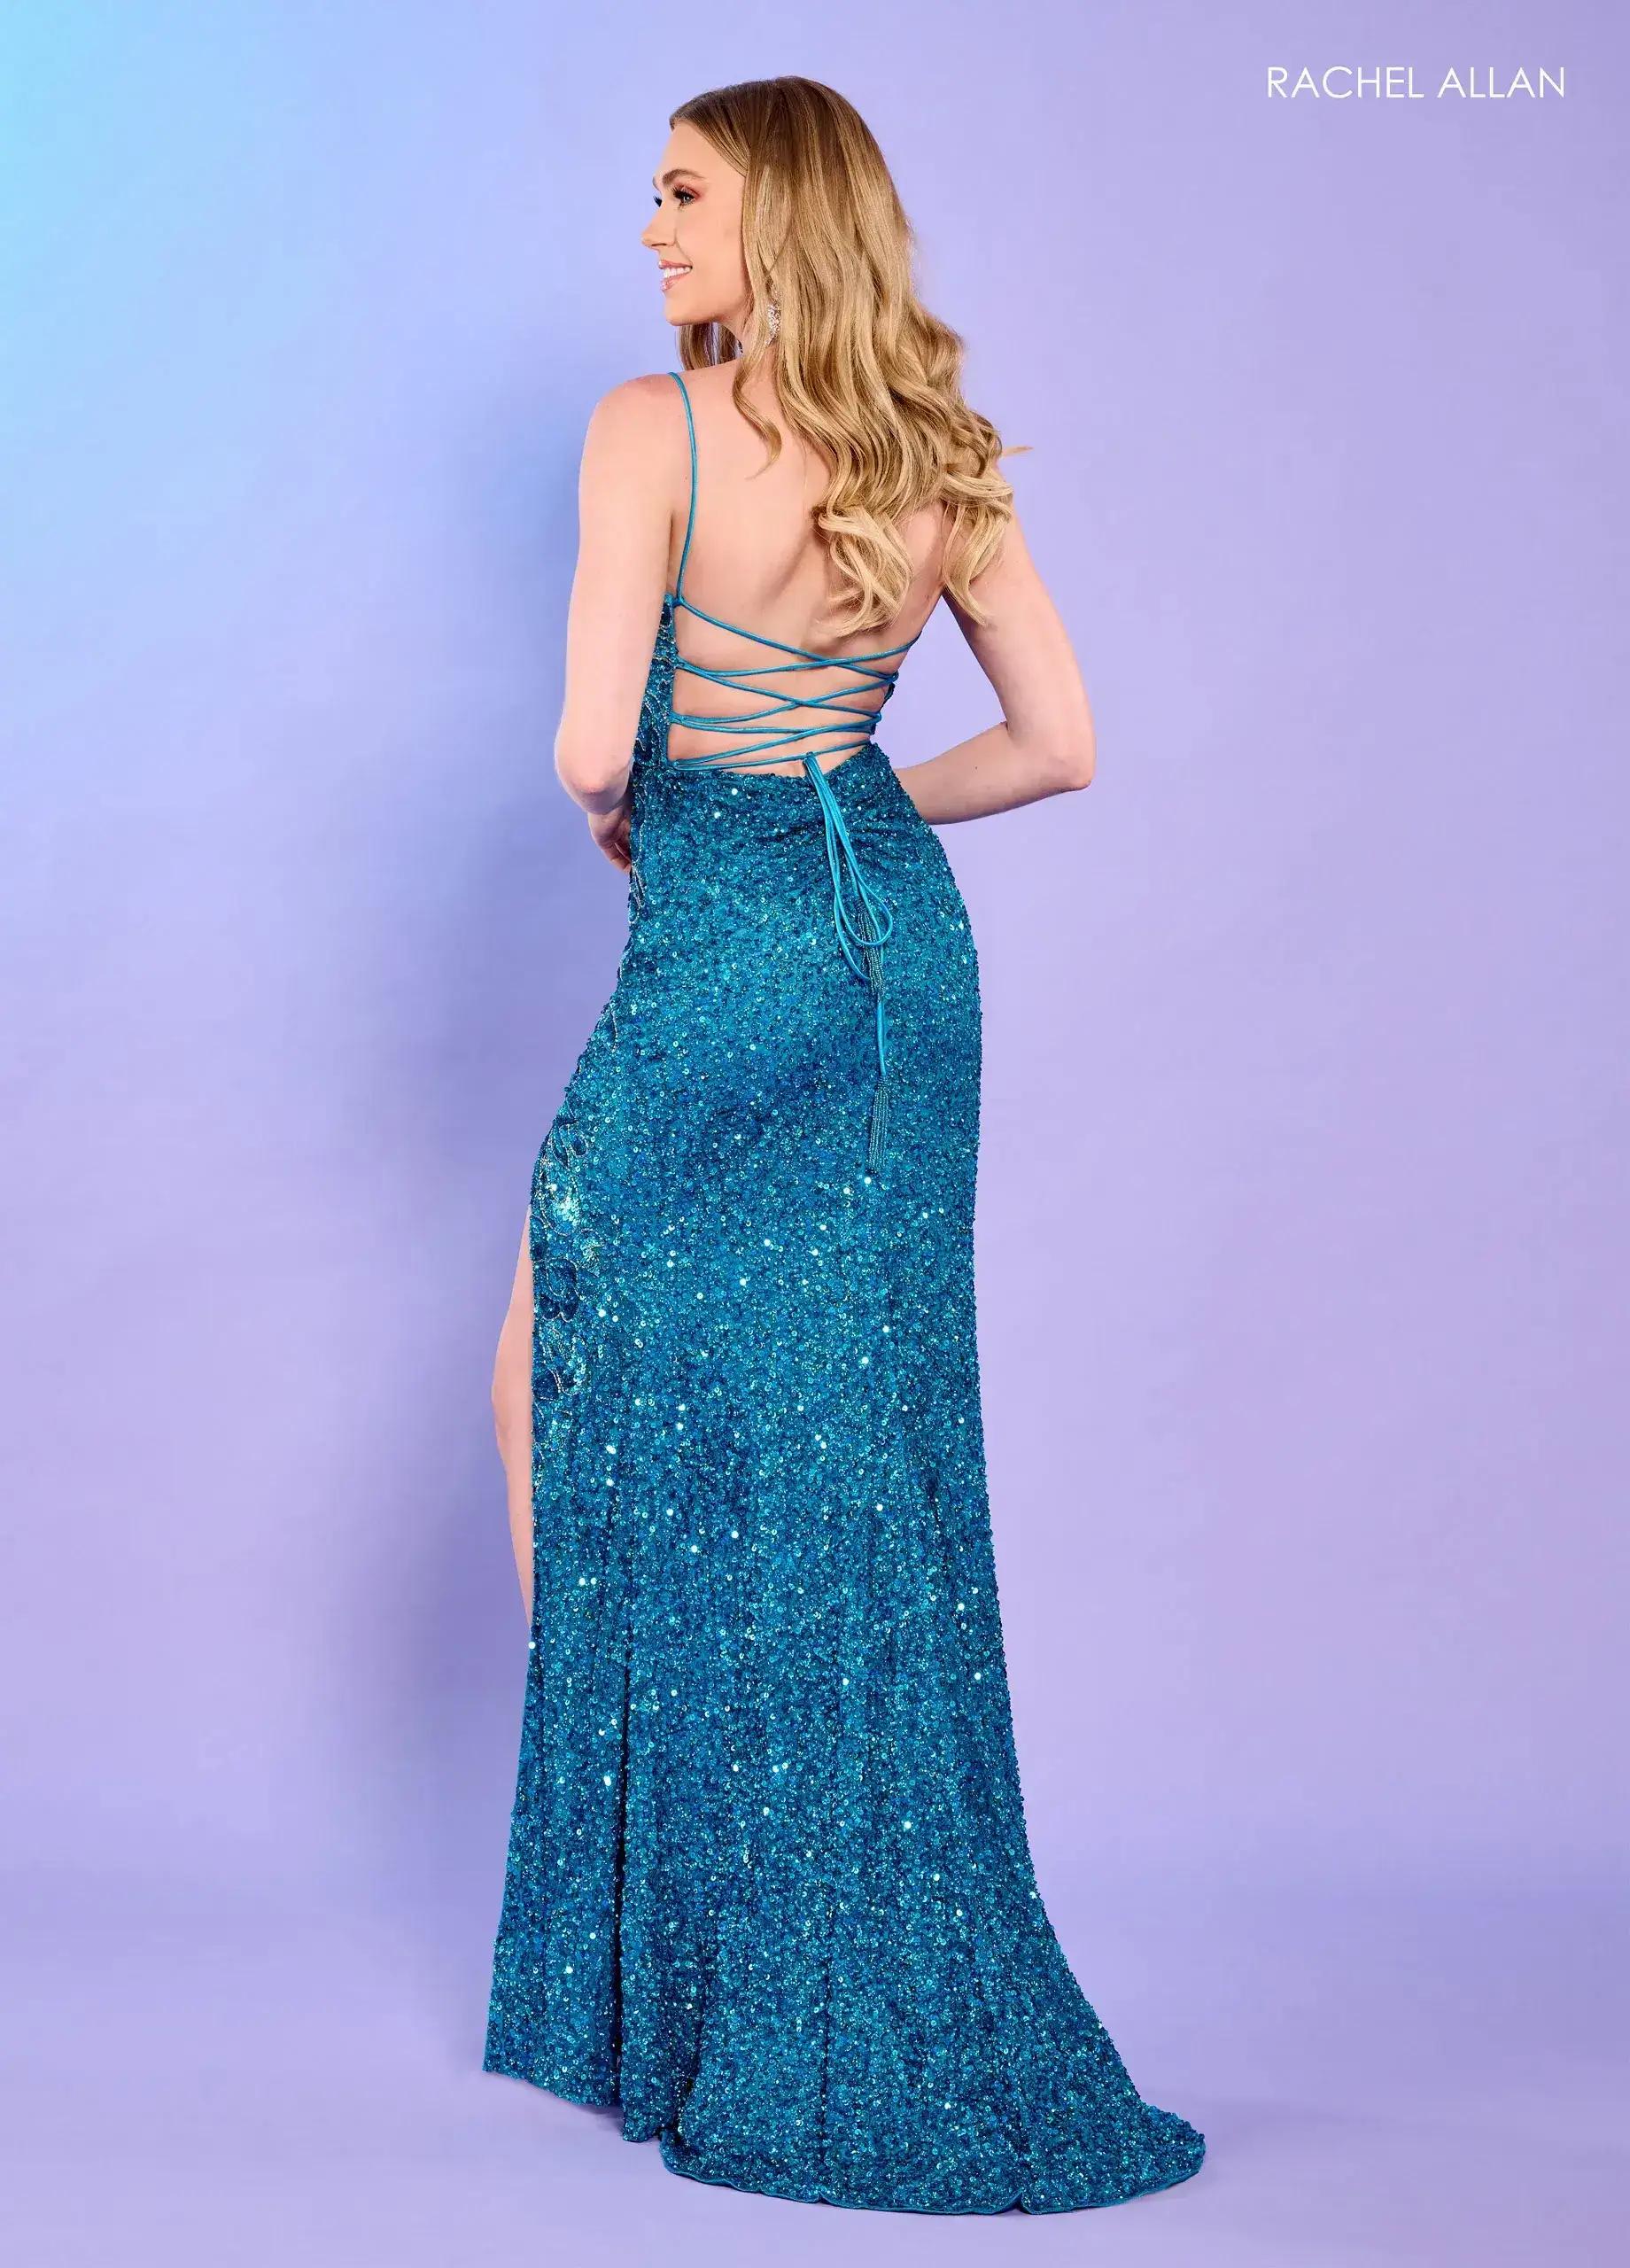 Photo of model wearing one of BQG featured gowns